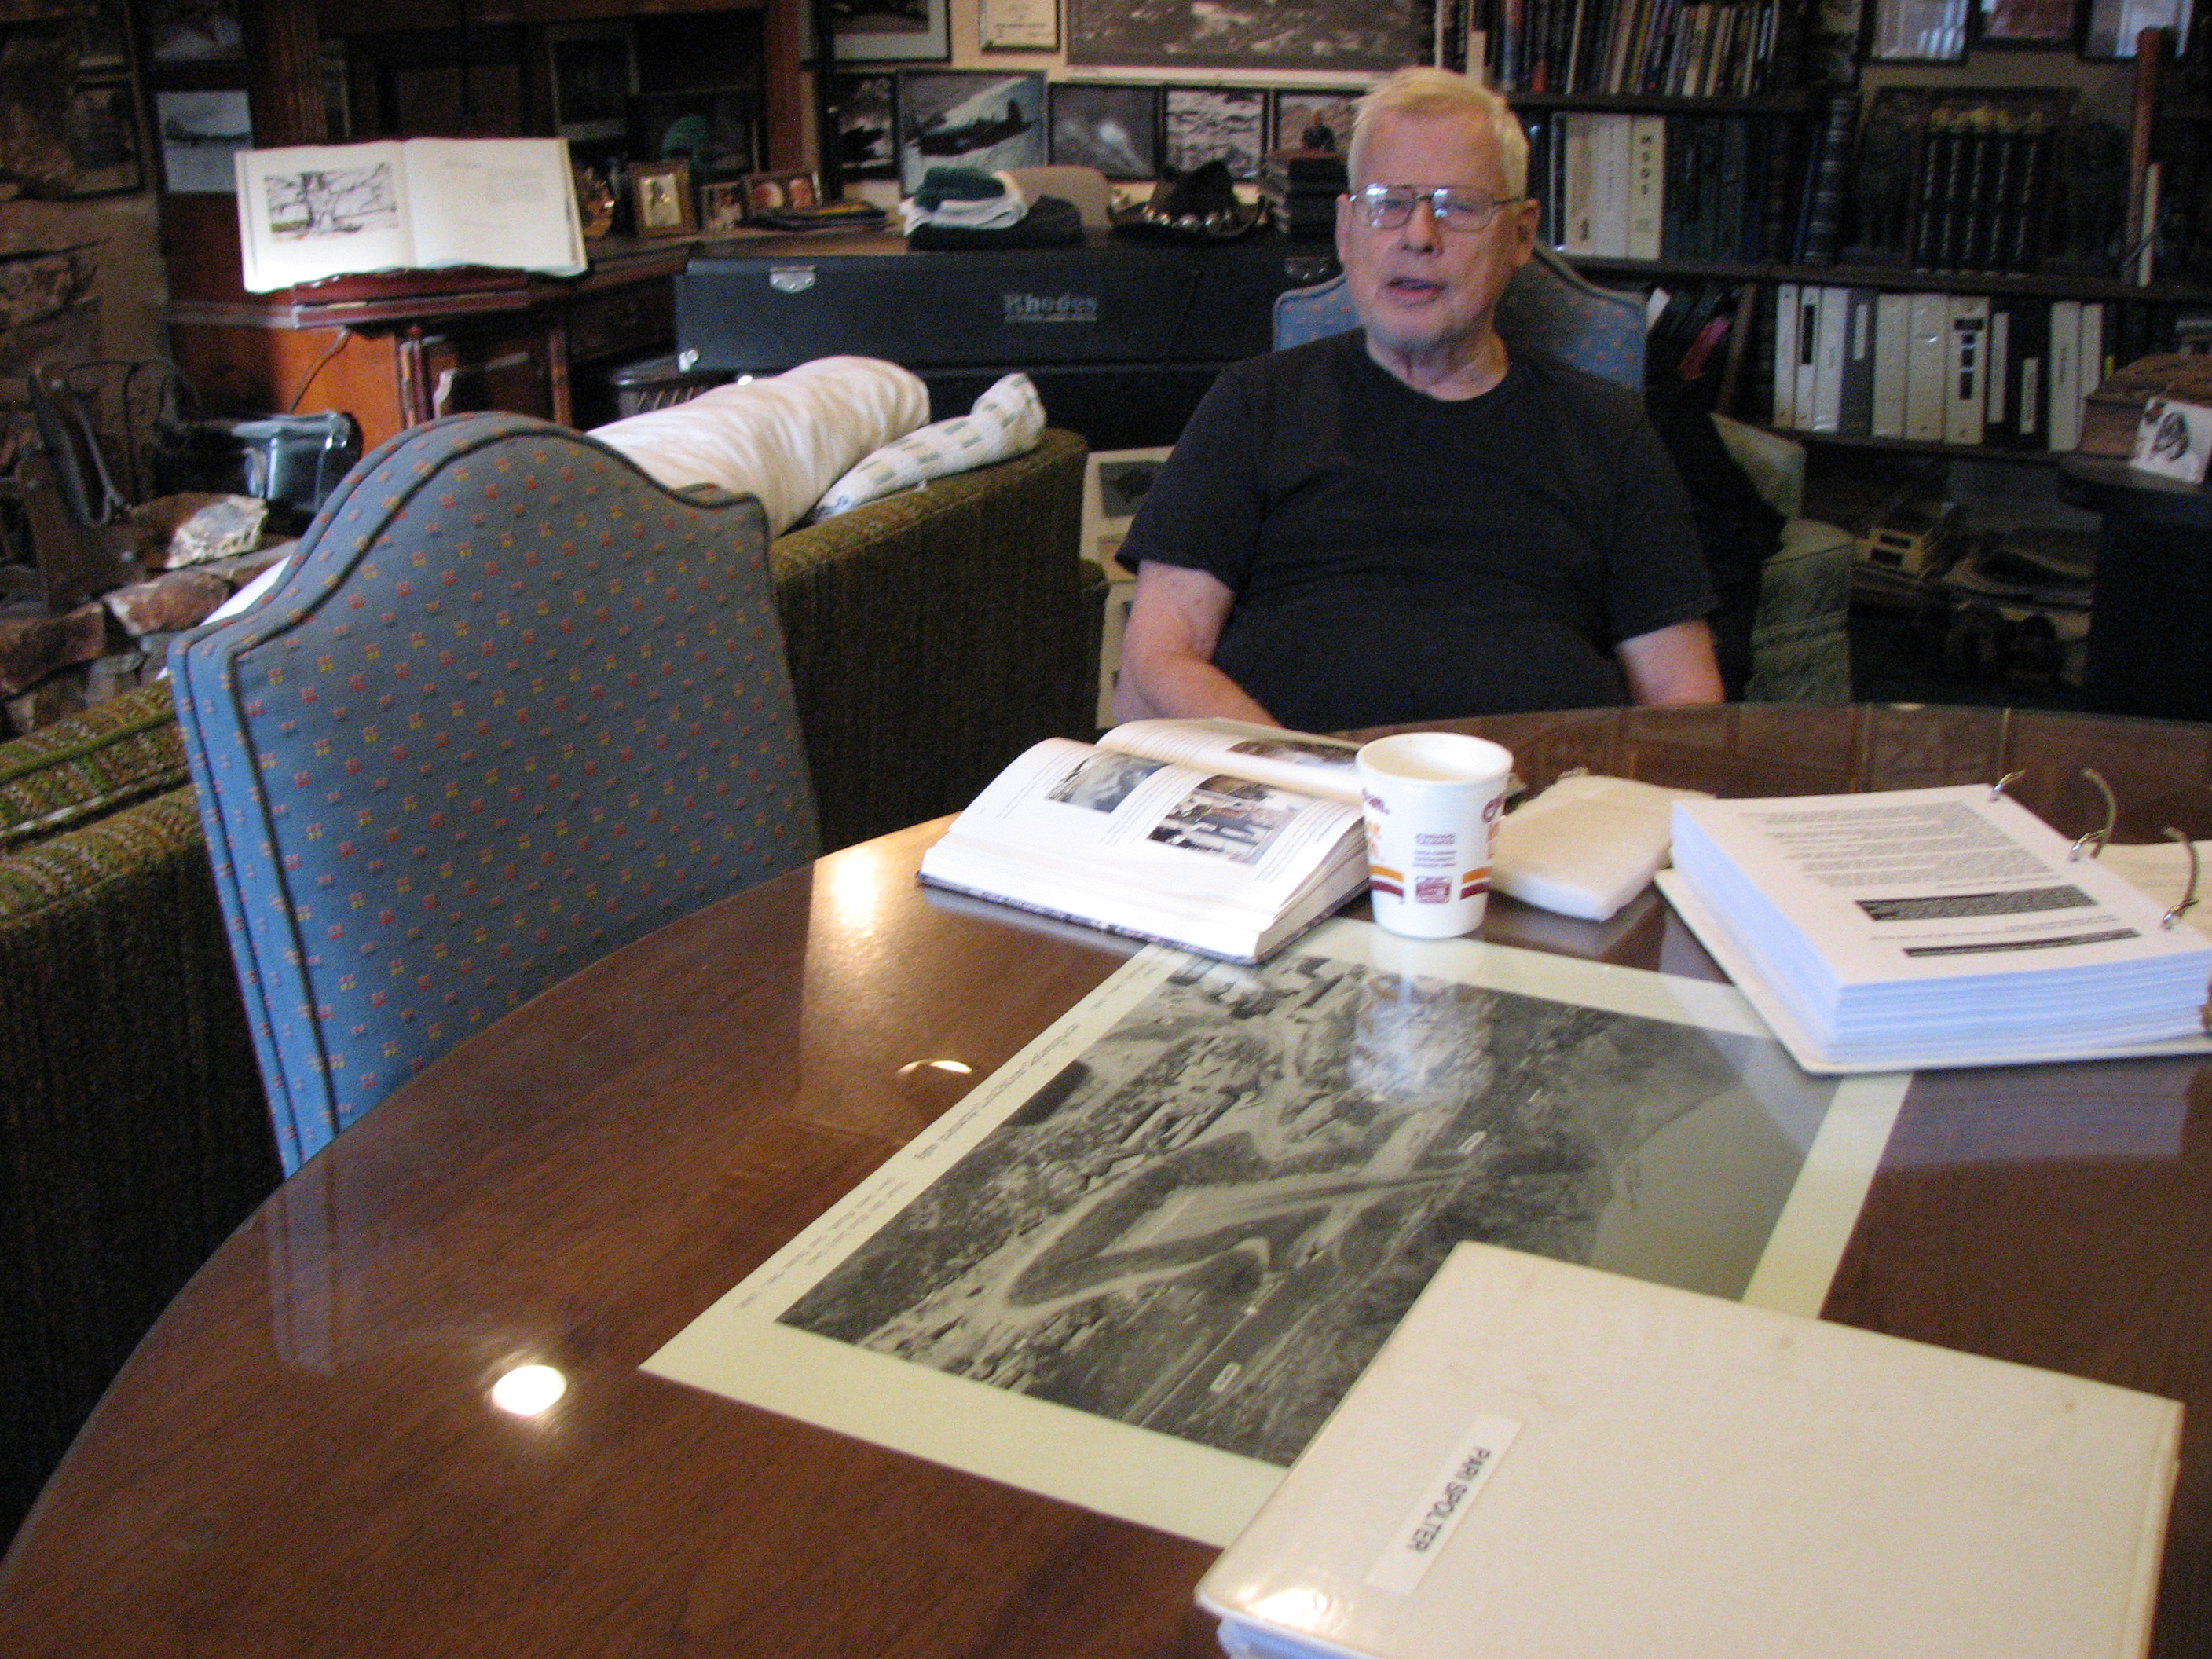 John Lear in his Lair, taken from the Bases Project interviews, with Anne Hess, in Feb 2013.